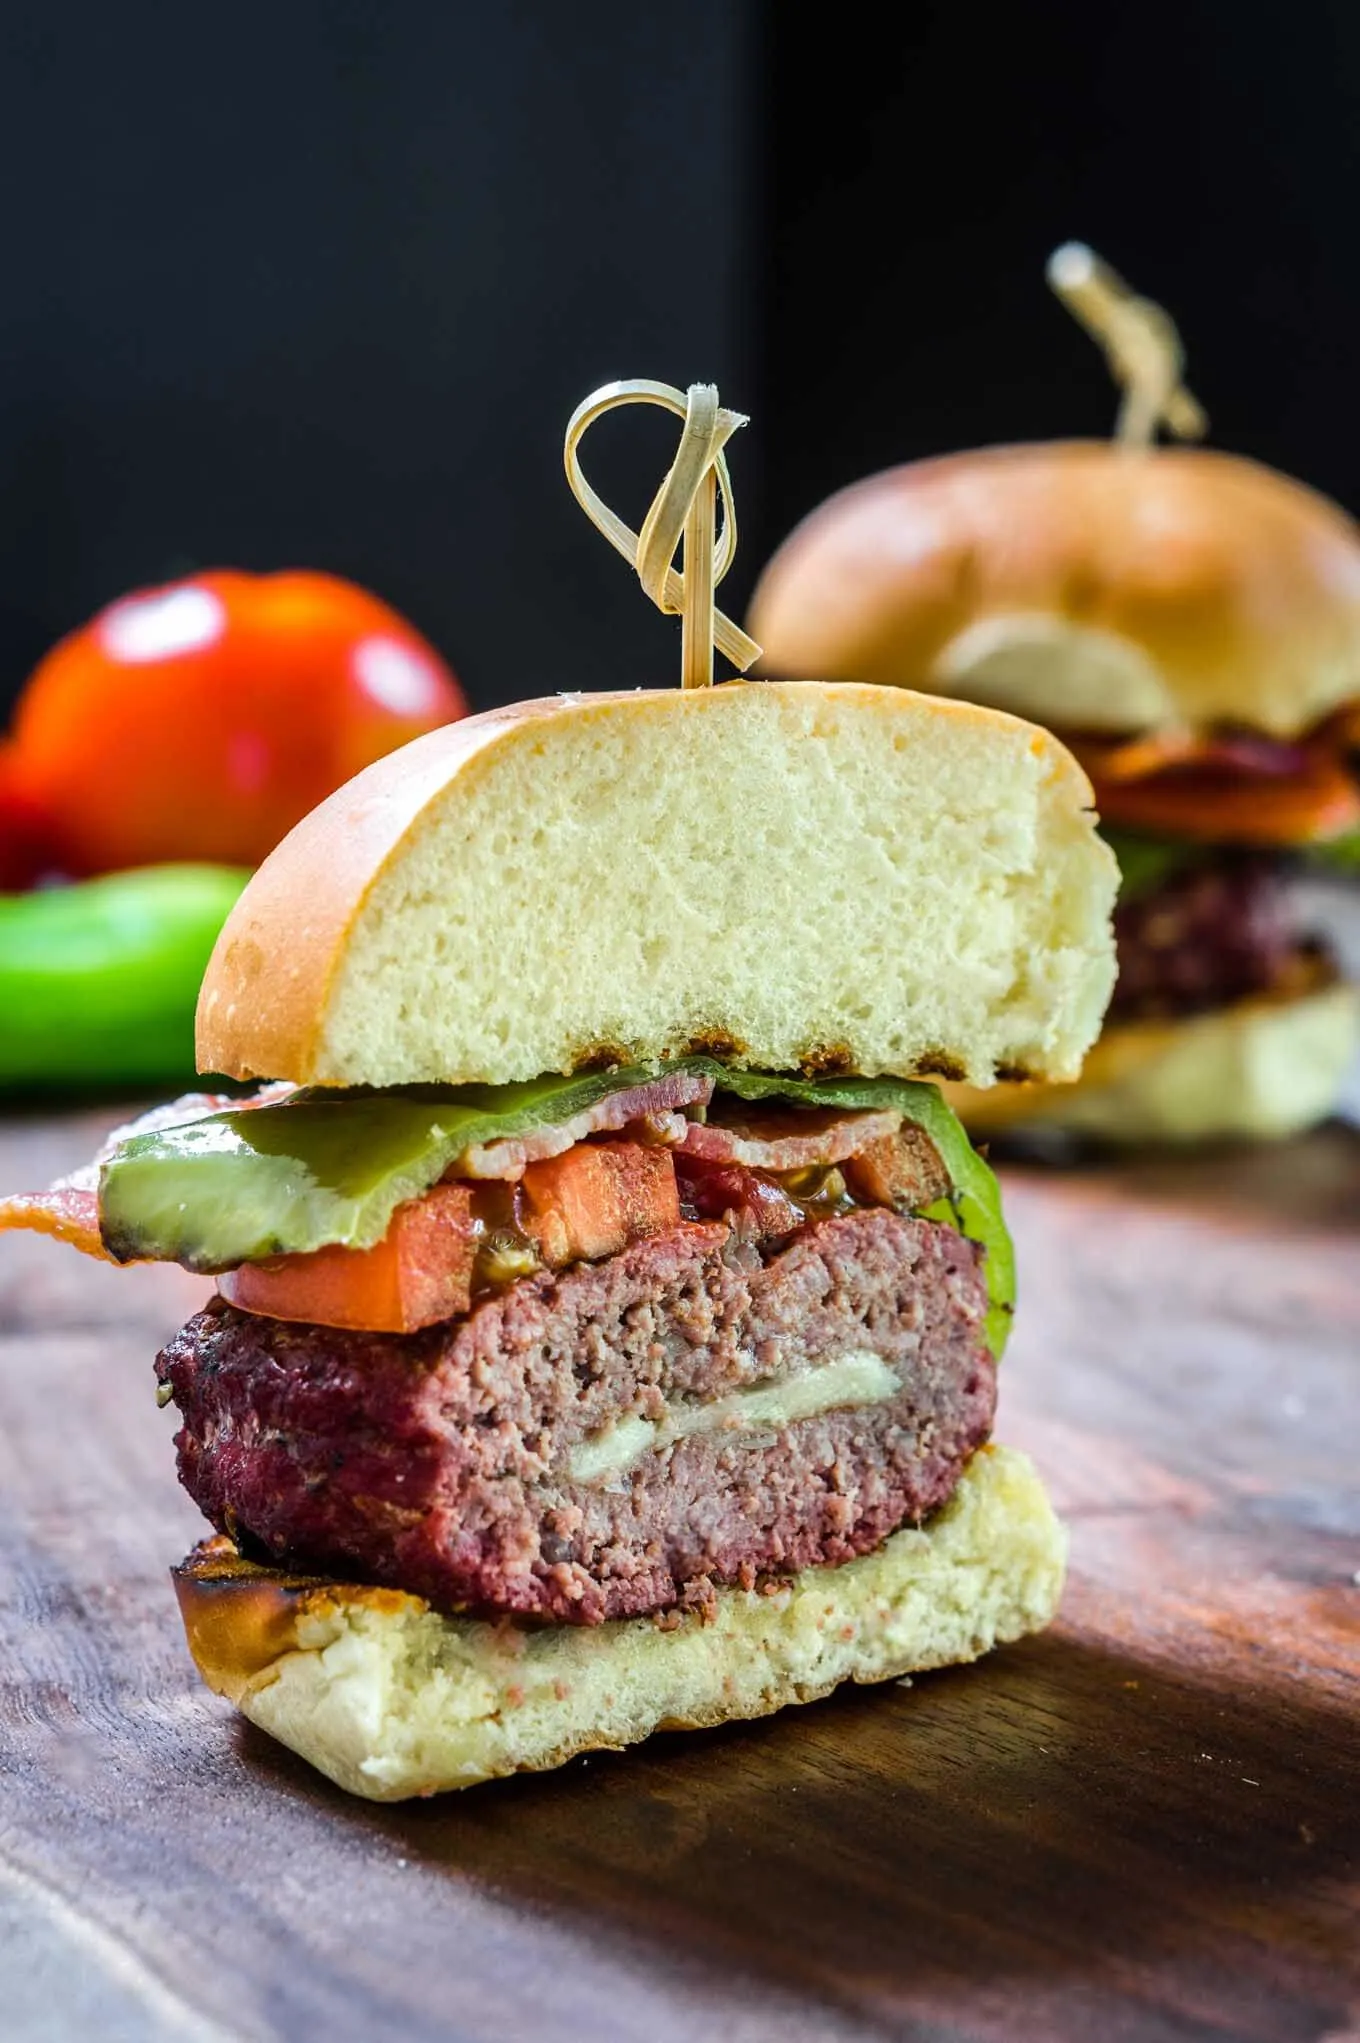  A Hatch Chile Gruyere Burger on a bun cut in half showing how its stuffed with cheese and chile and layered with bacon, tomato, and chile then secured with a bamboo skewer.